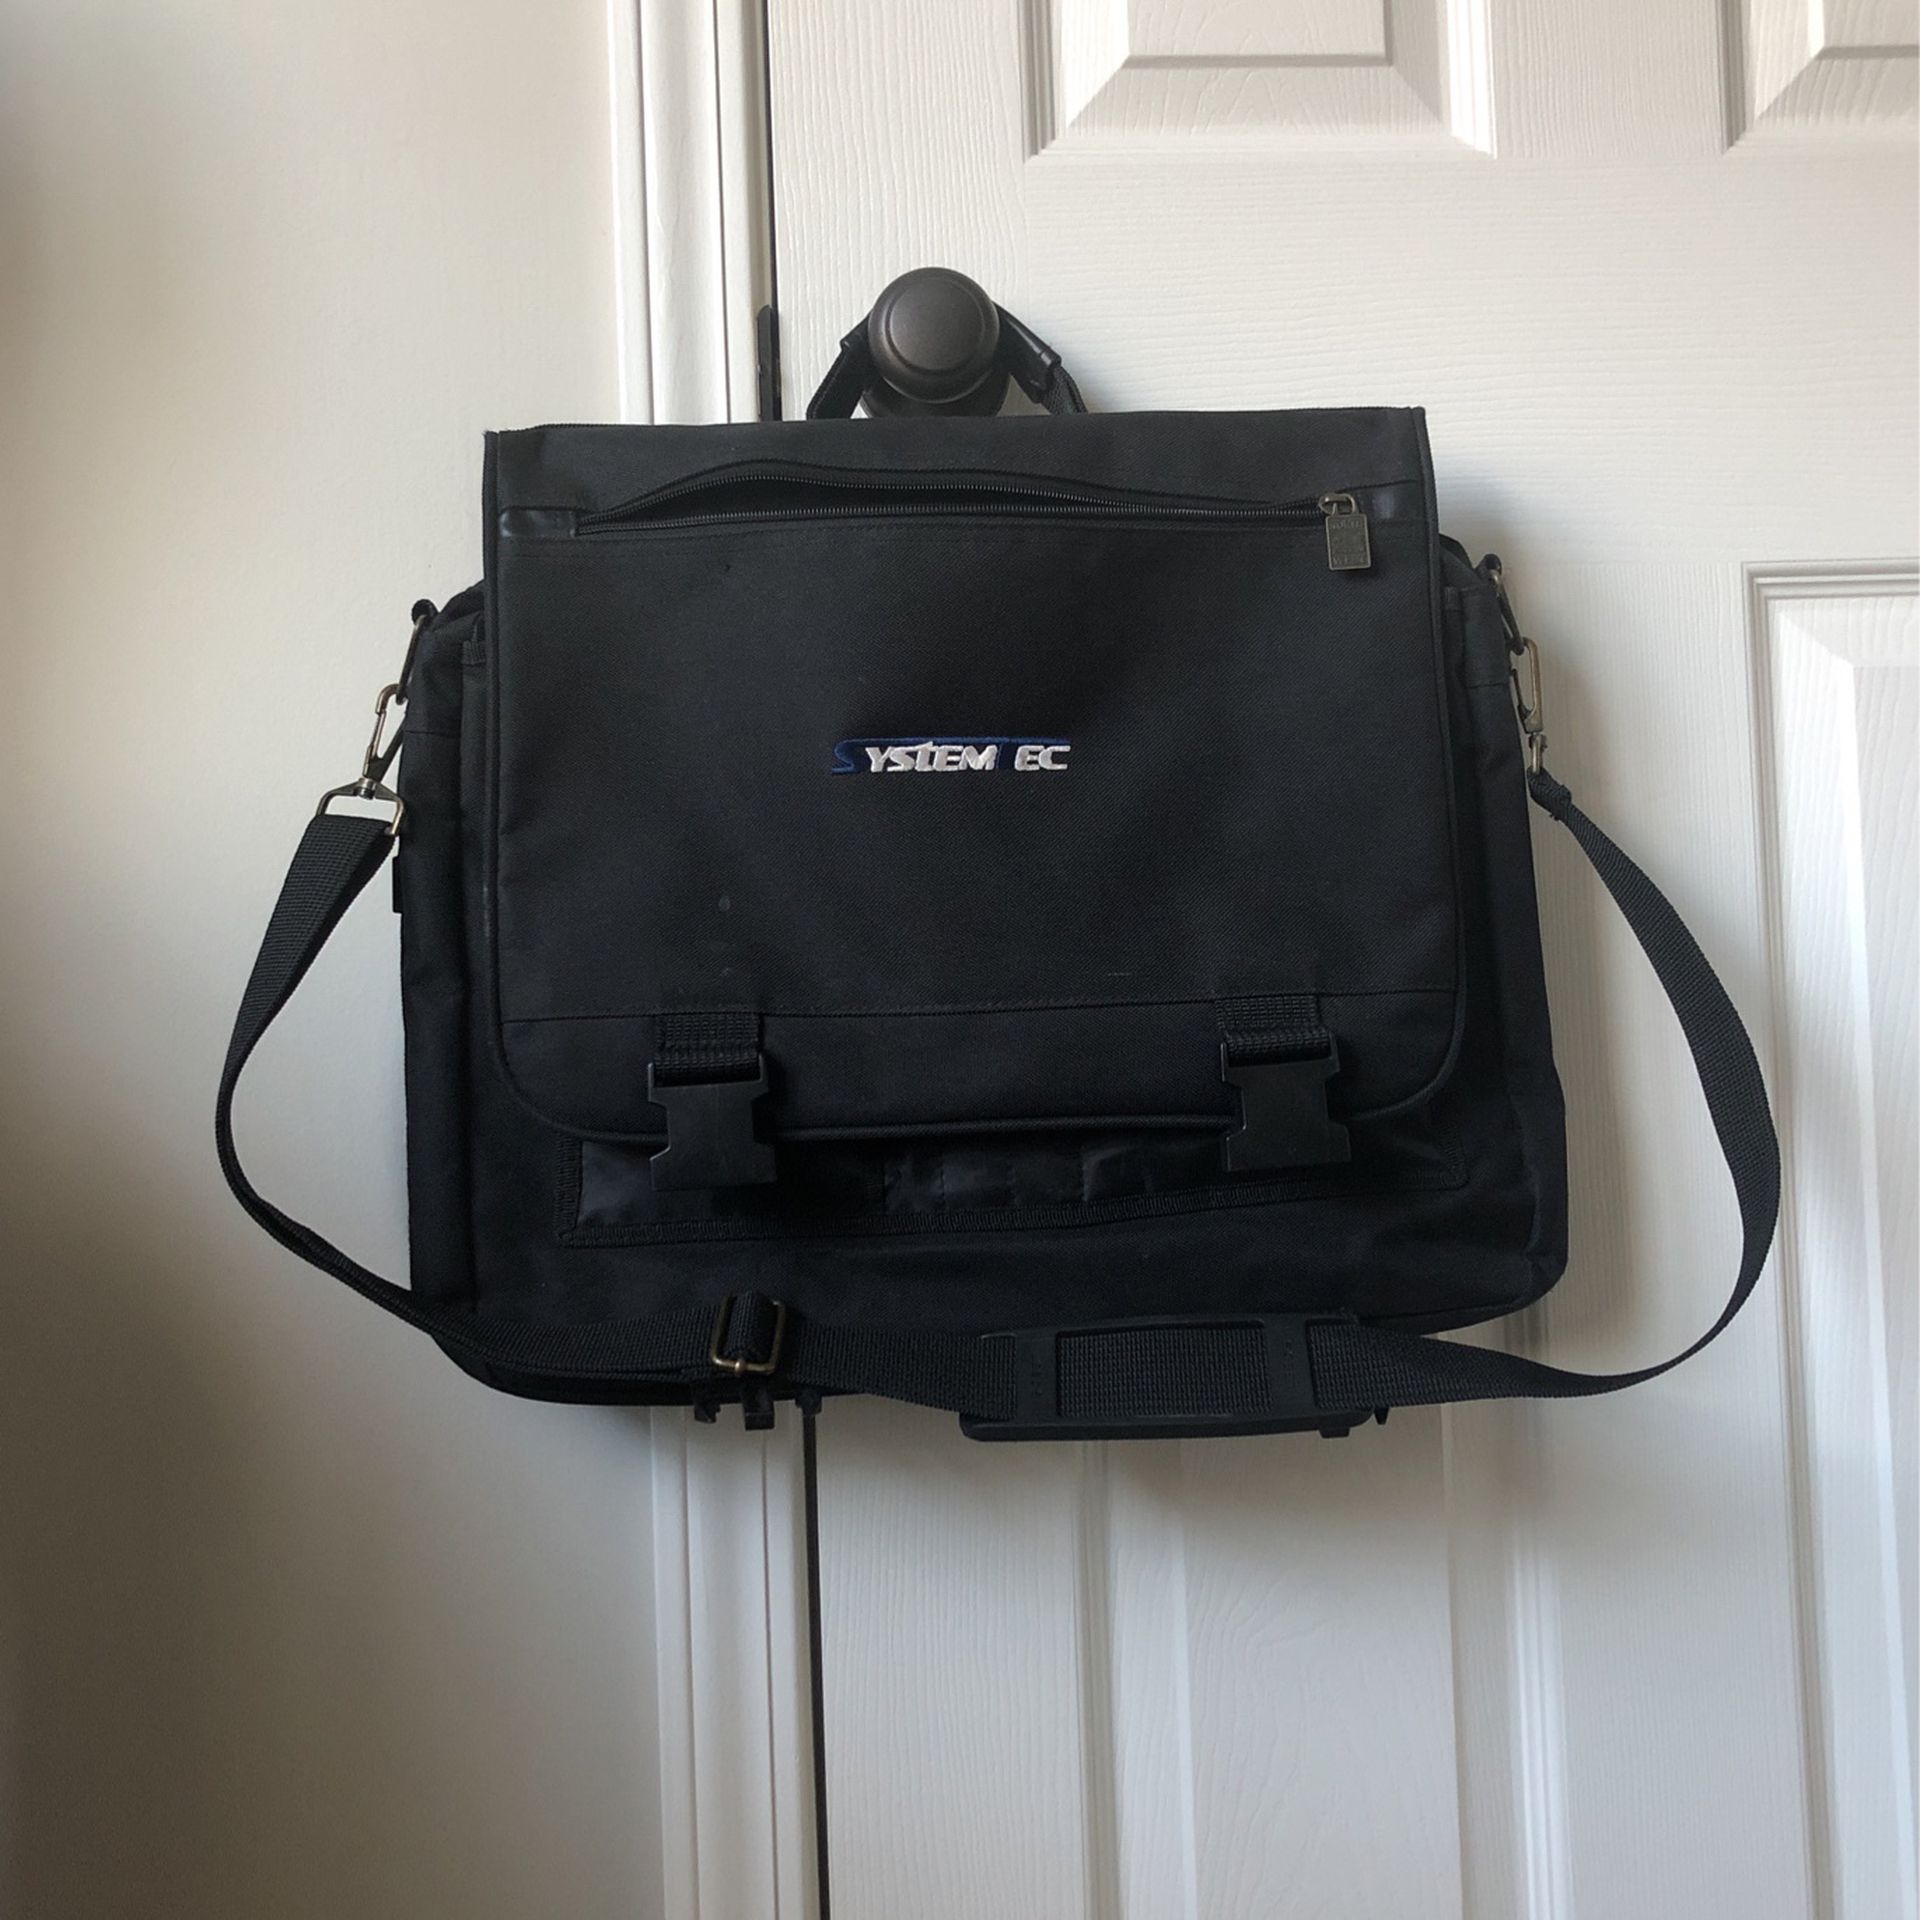 Black Satchel With Adjustable Strap And Buckles